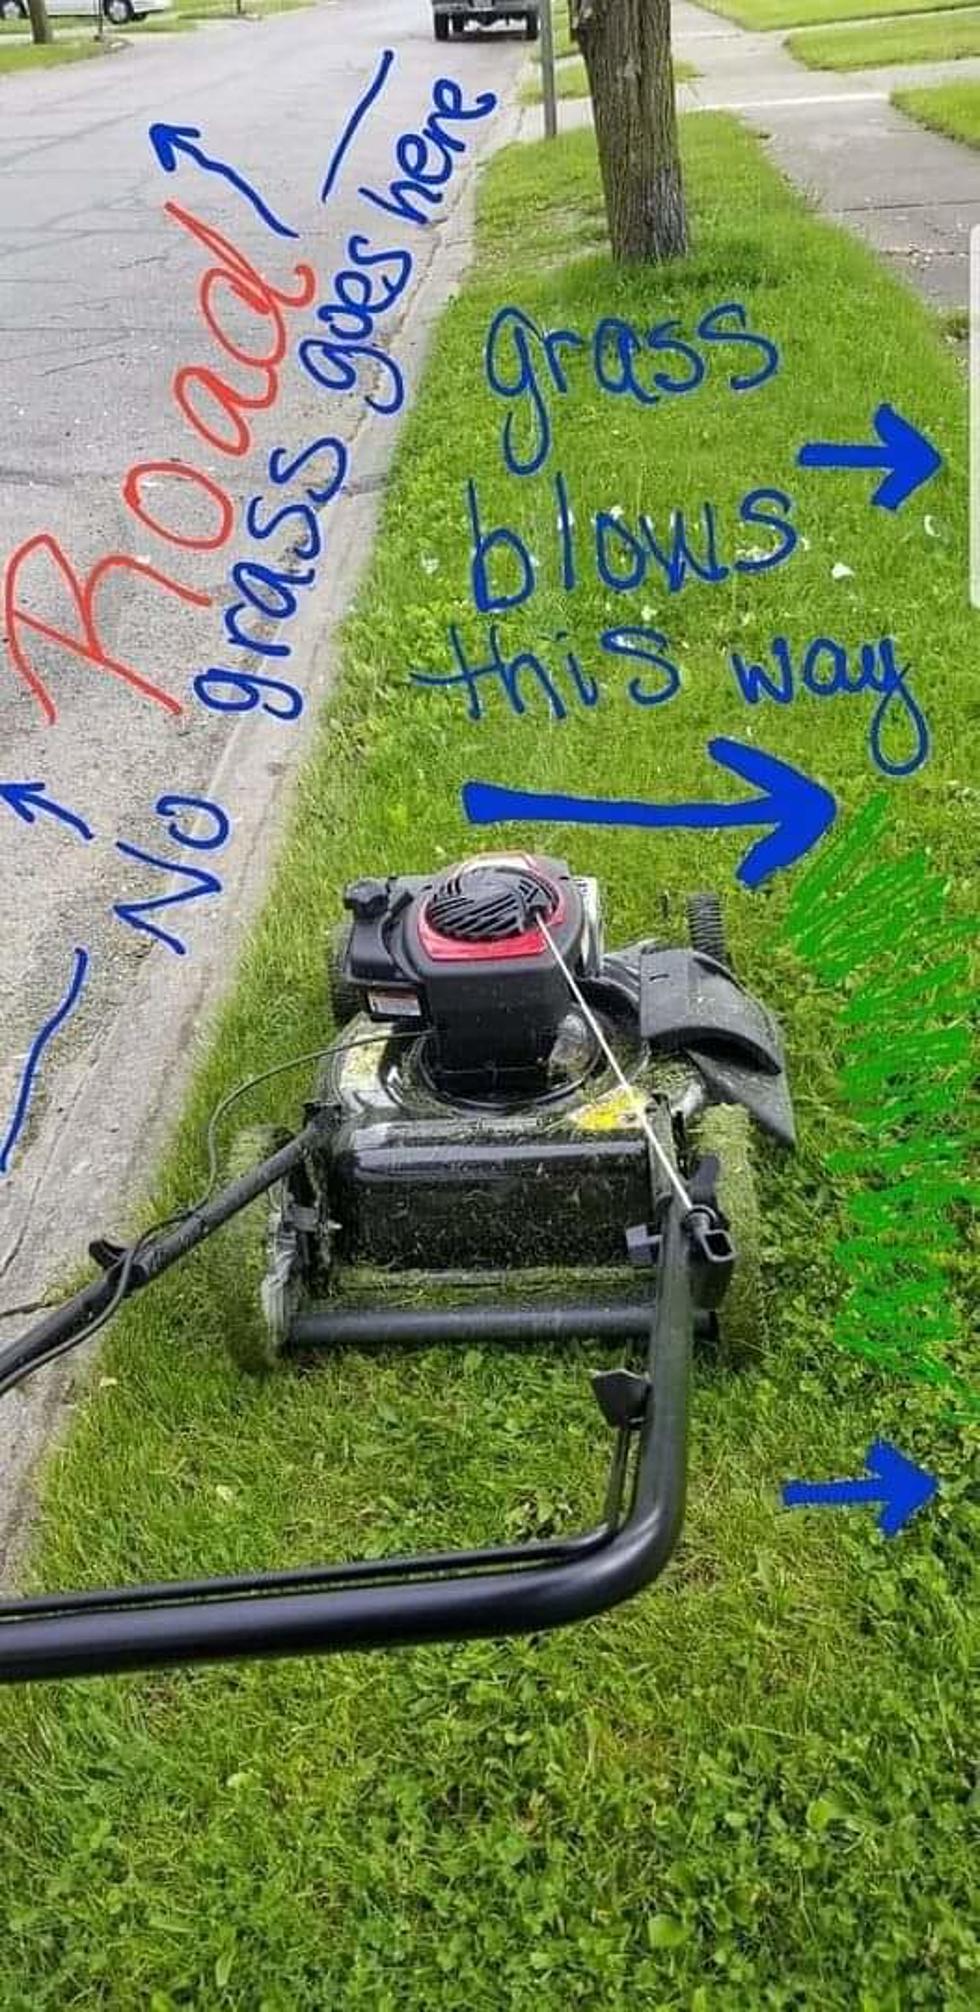 Is It Legal In Massachusetts To Blow Grass Clippings Onto The Street?